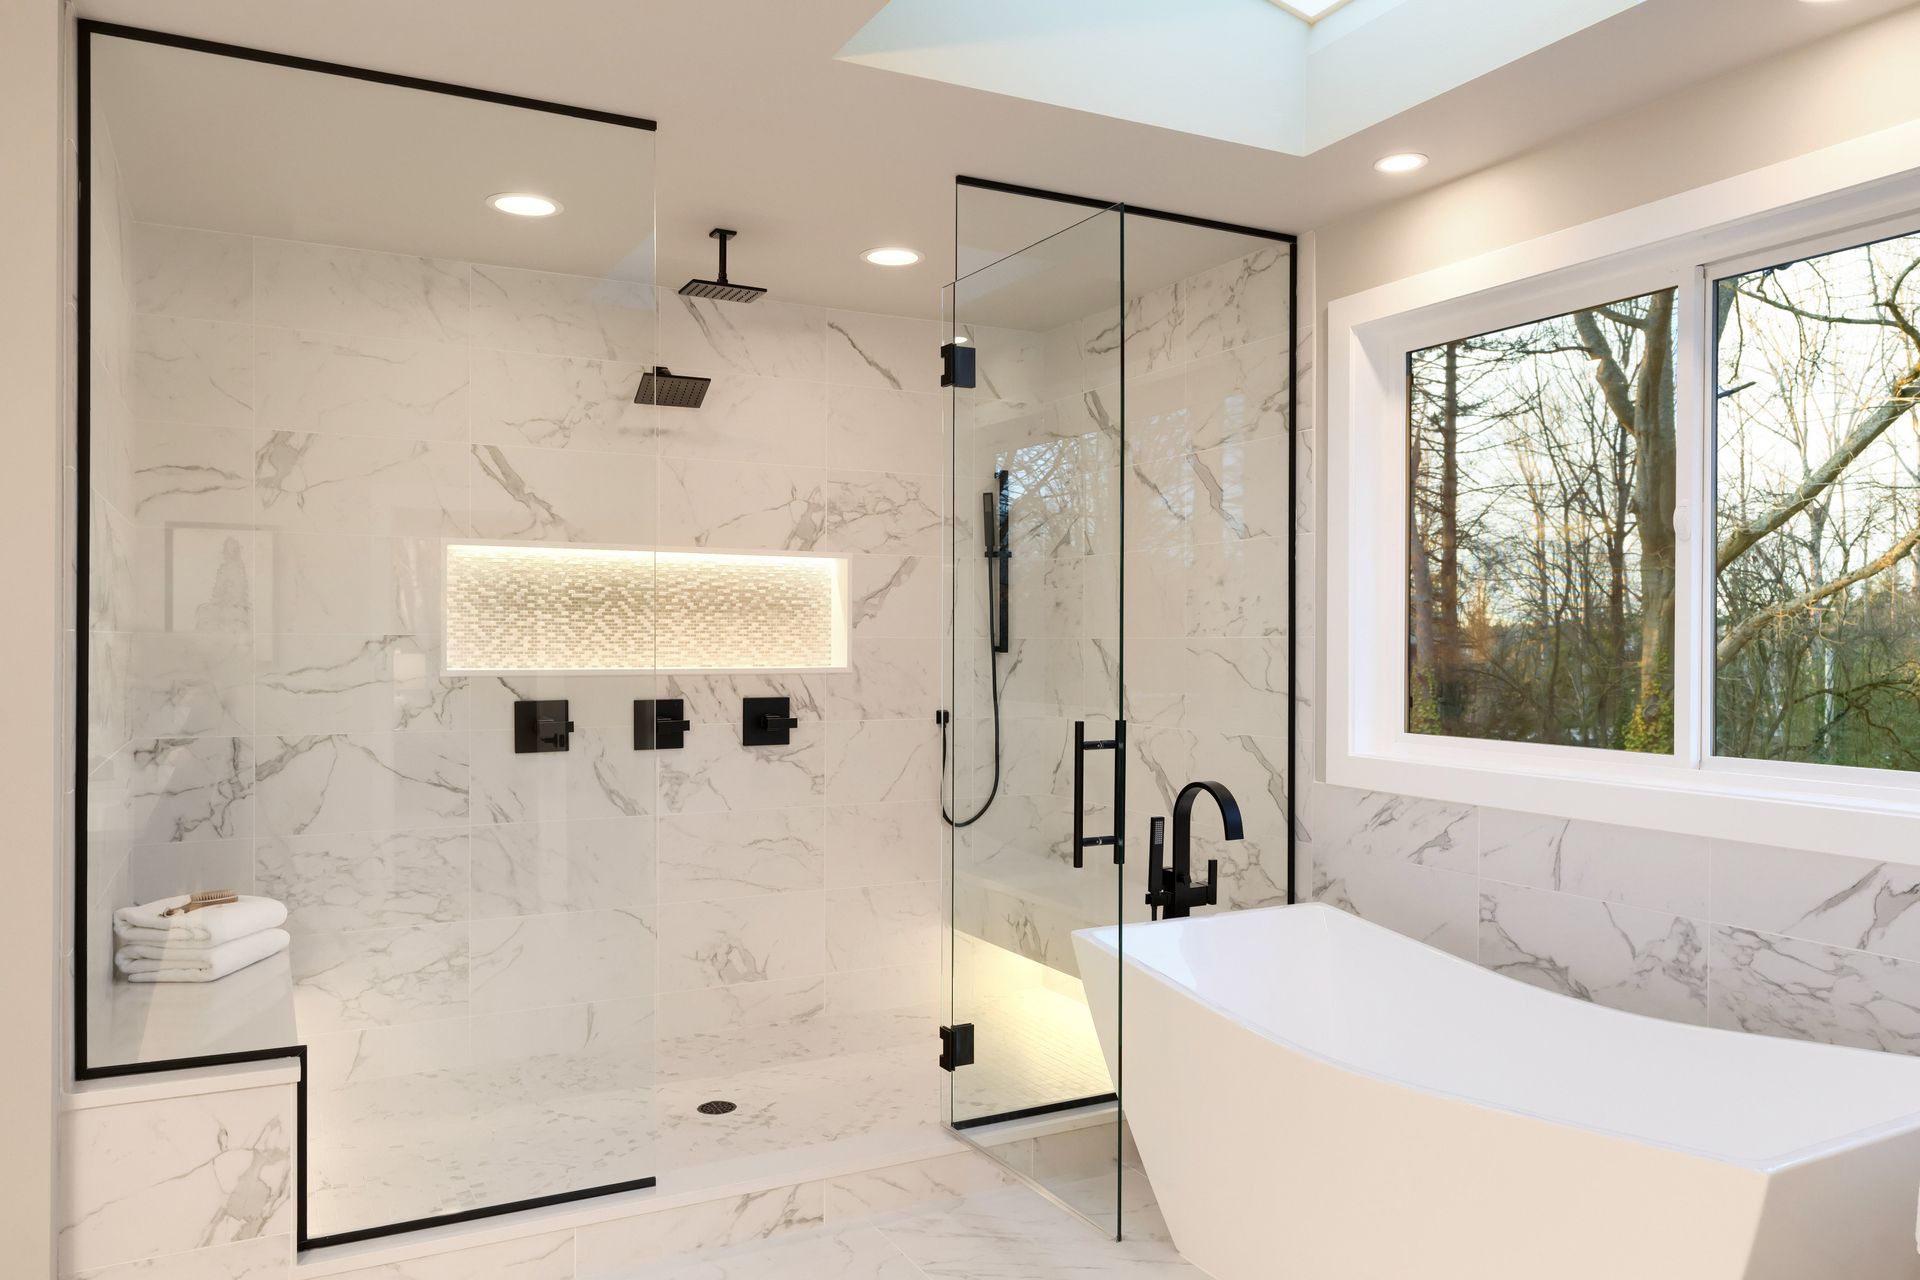 Spacious walk-in shower with white marble walls, mosaic accents, and ample natural light.